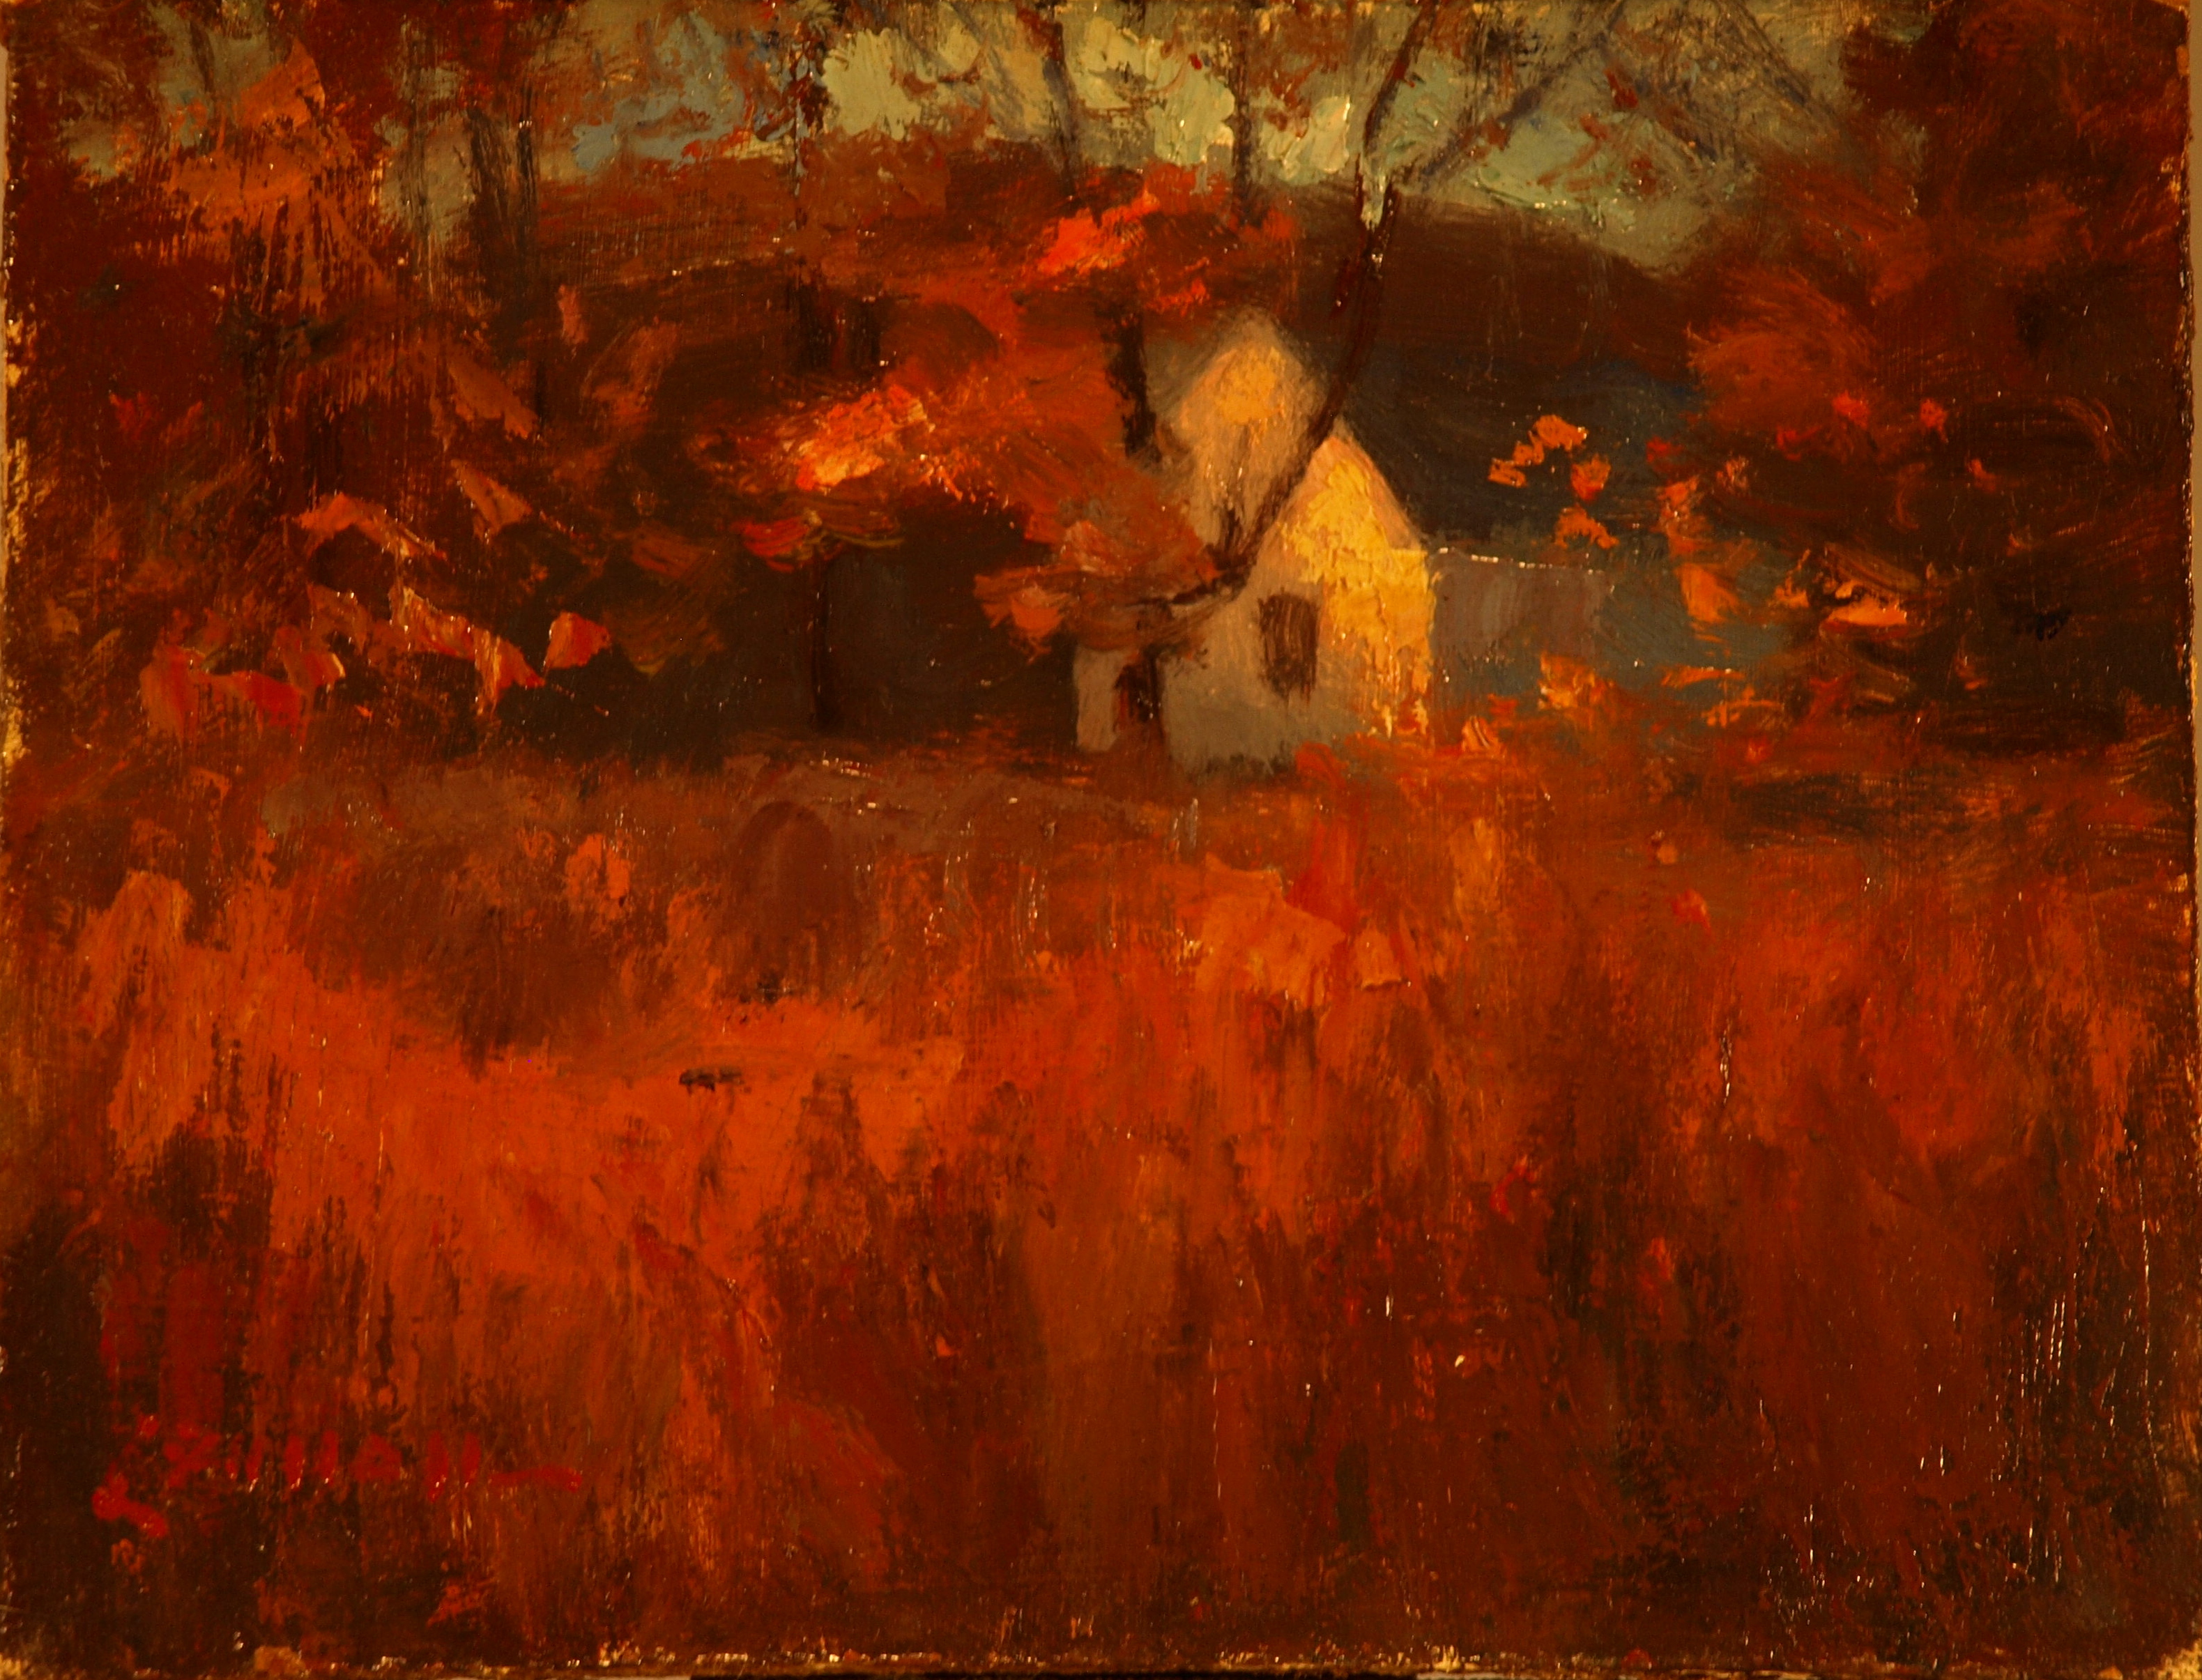 Red Grasses, Oil on Panel, 6 x 8 Inches, by Bernard Lennon, $125